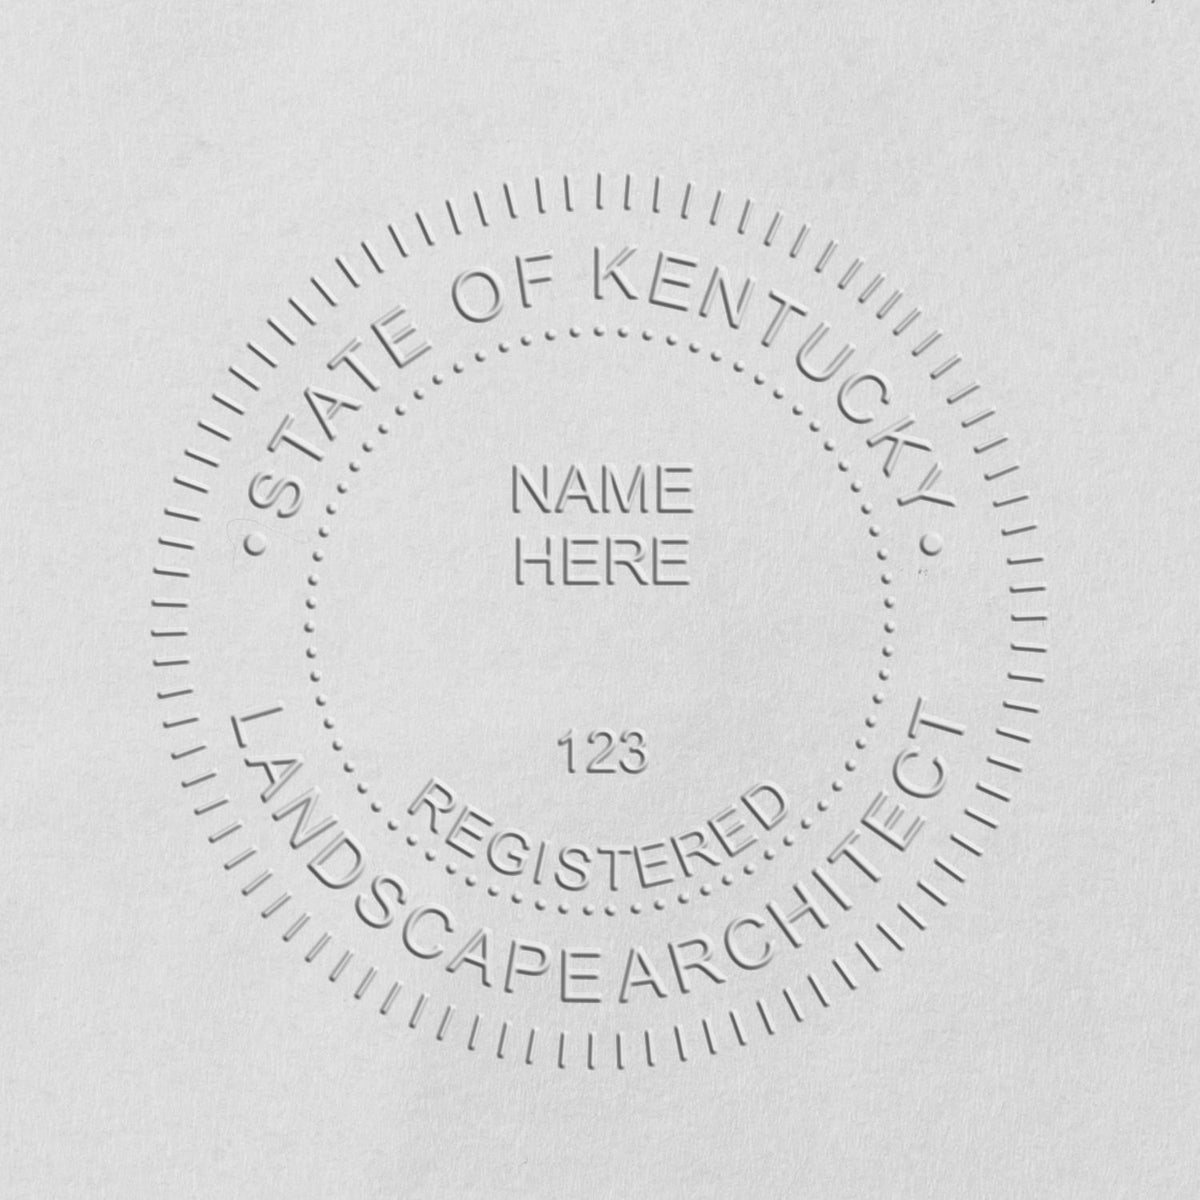 An in use photo of the Hybrid Kentucky Landscape Architect Seal showing a sample imprint on a cardstock